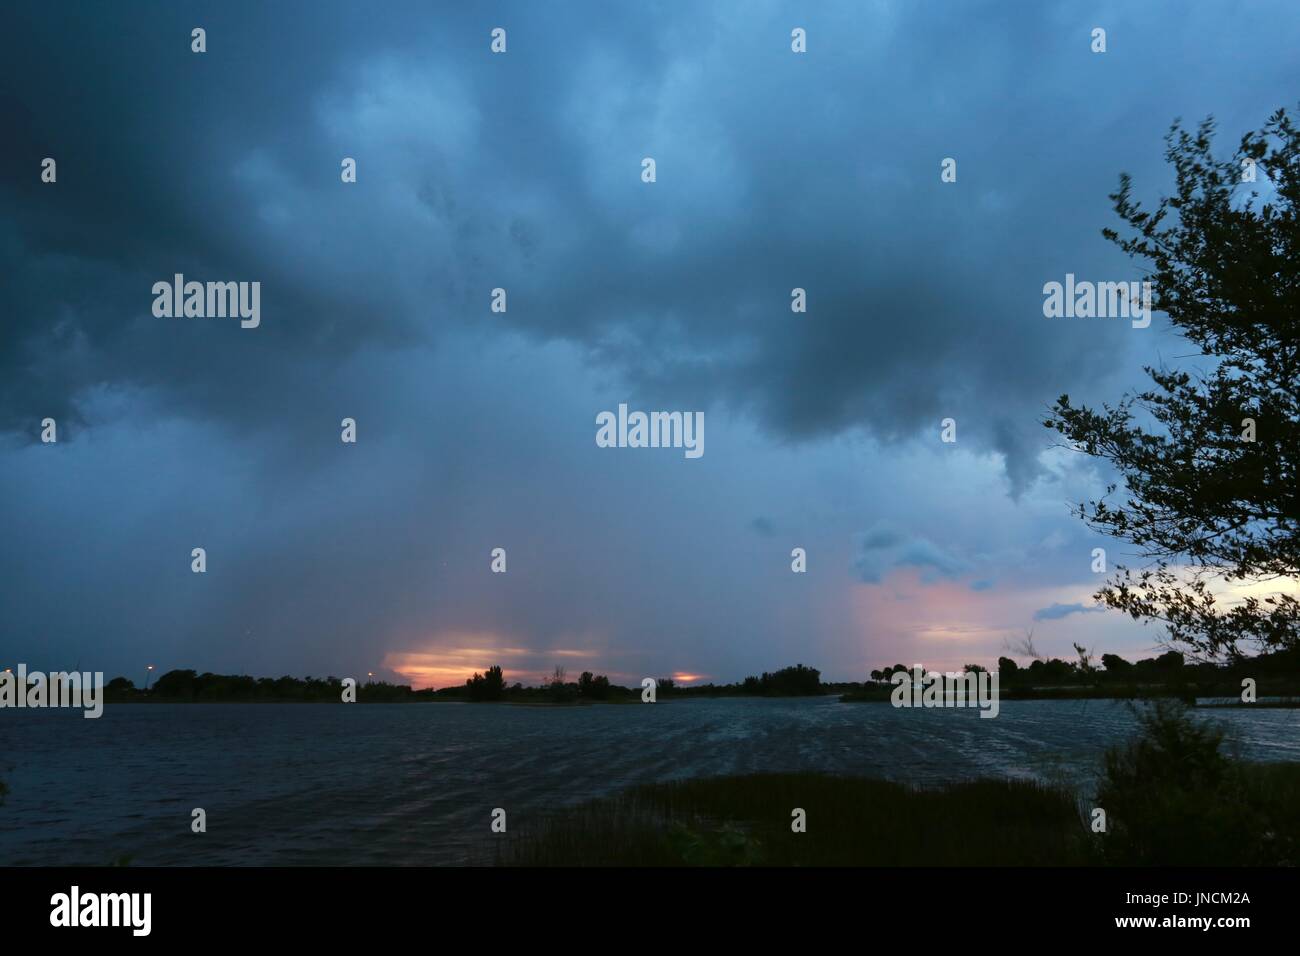 Huge Bank of Rain Clouds Approaching Over Lake at Sunset Stock Photo